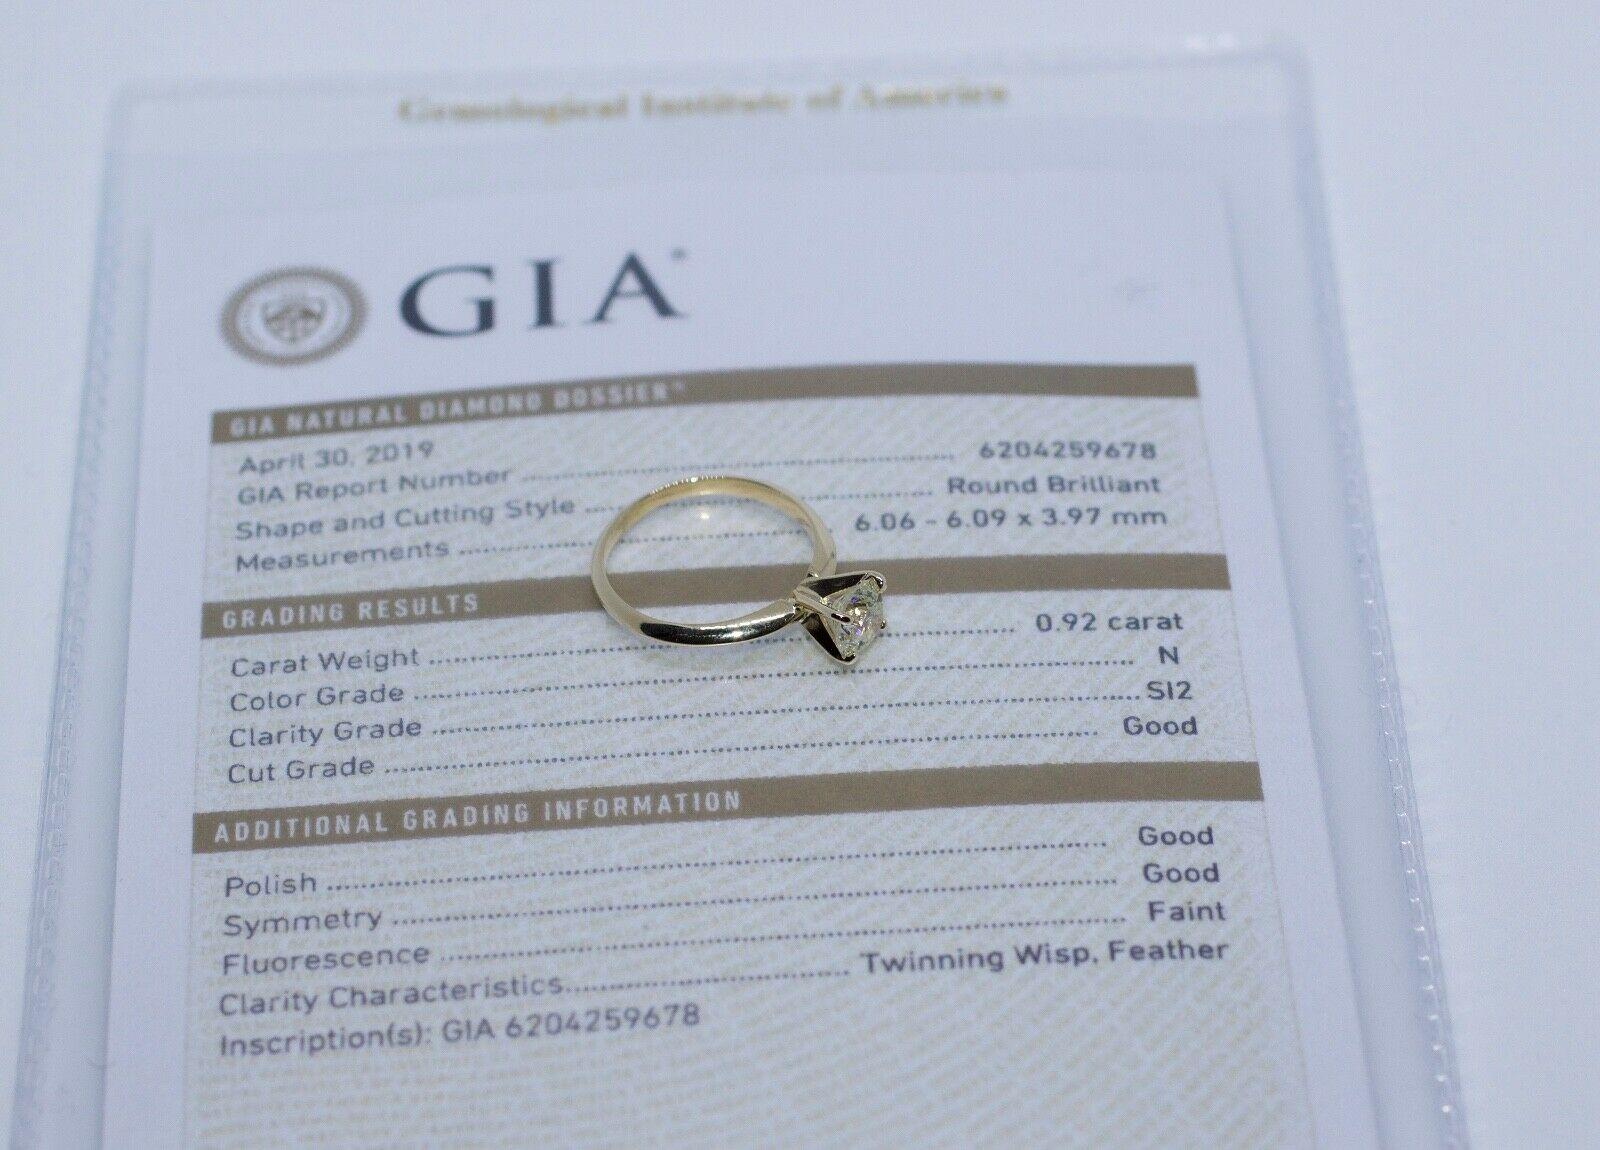 14k Yellow Gold Round GIA Certified Diamond Solitaire Engagement Ring
Ring Size 5.75
2.0 Grams
1 Round Brilliant Cut Diamond 0.92 Carats 
Color: N Clarity: Si2